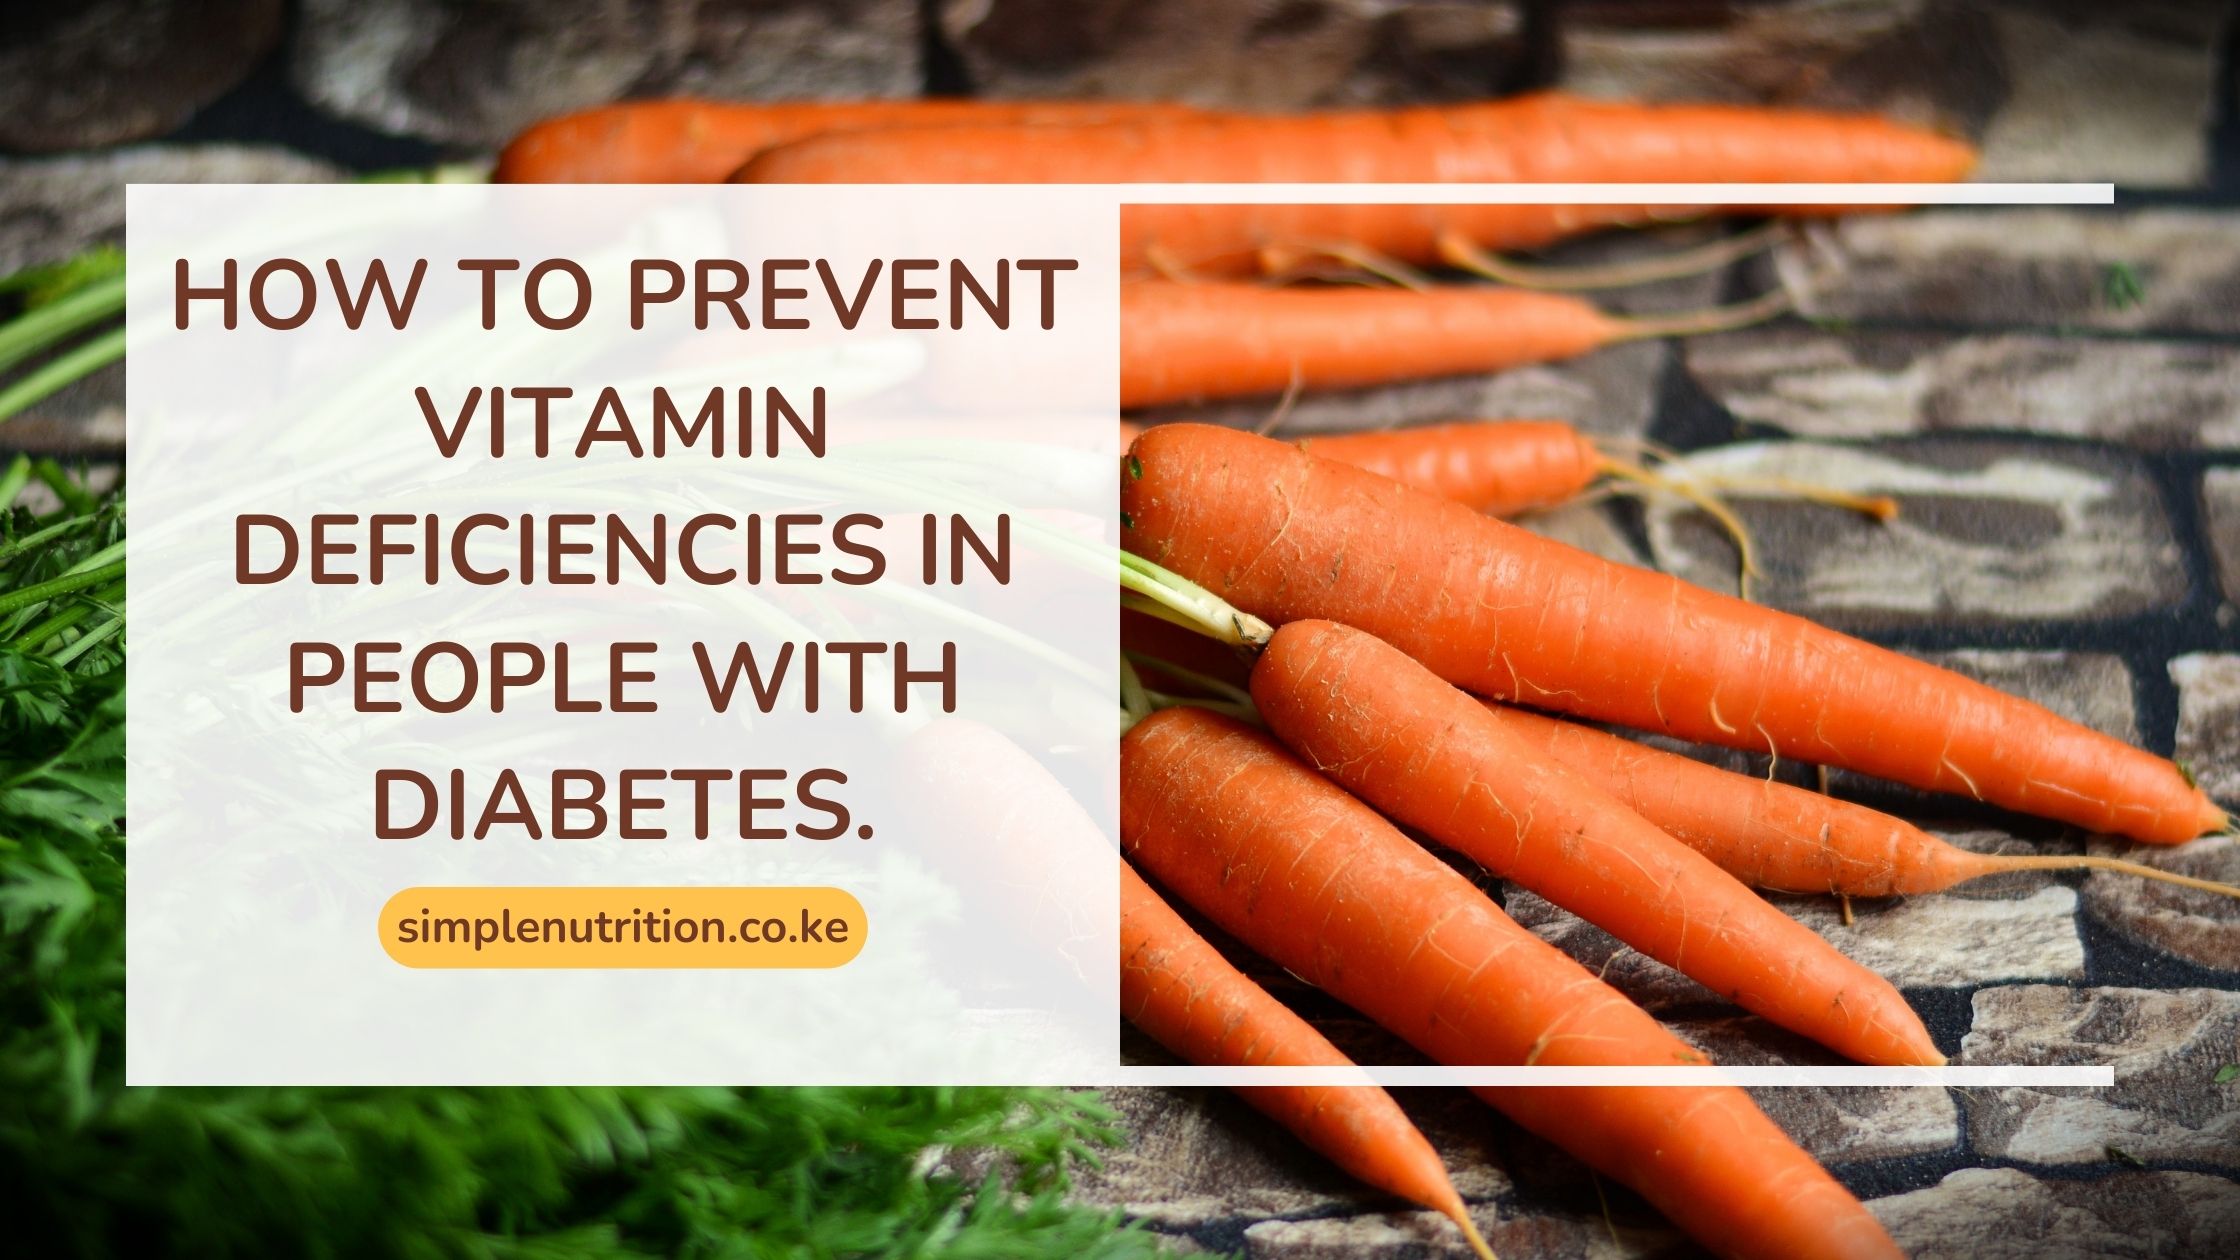 How To Prevent Vitamin Deficiencies In People With Diabetes.